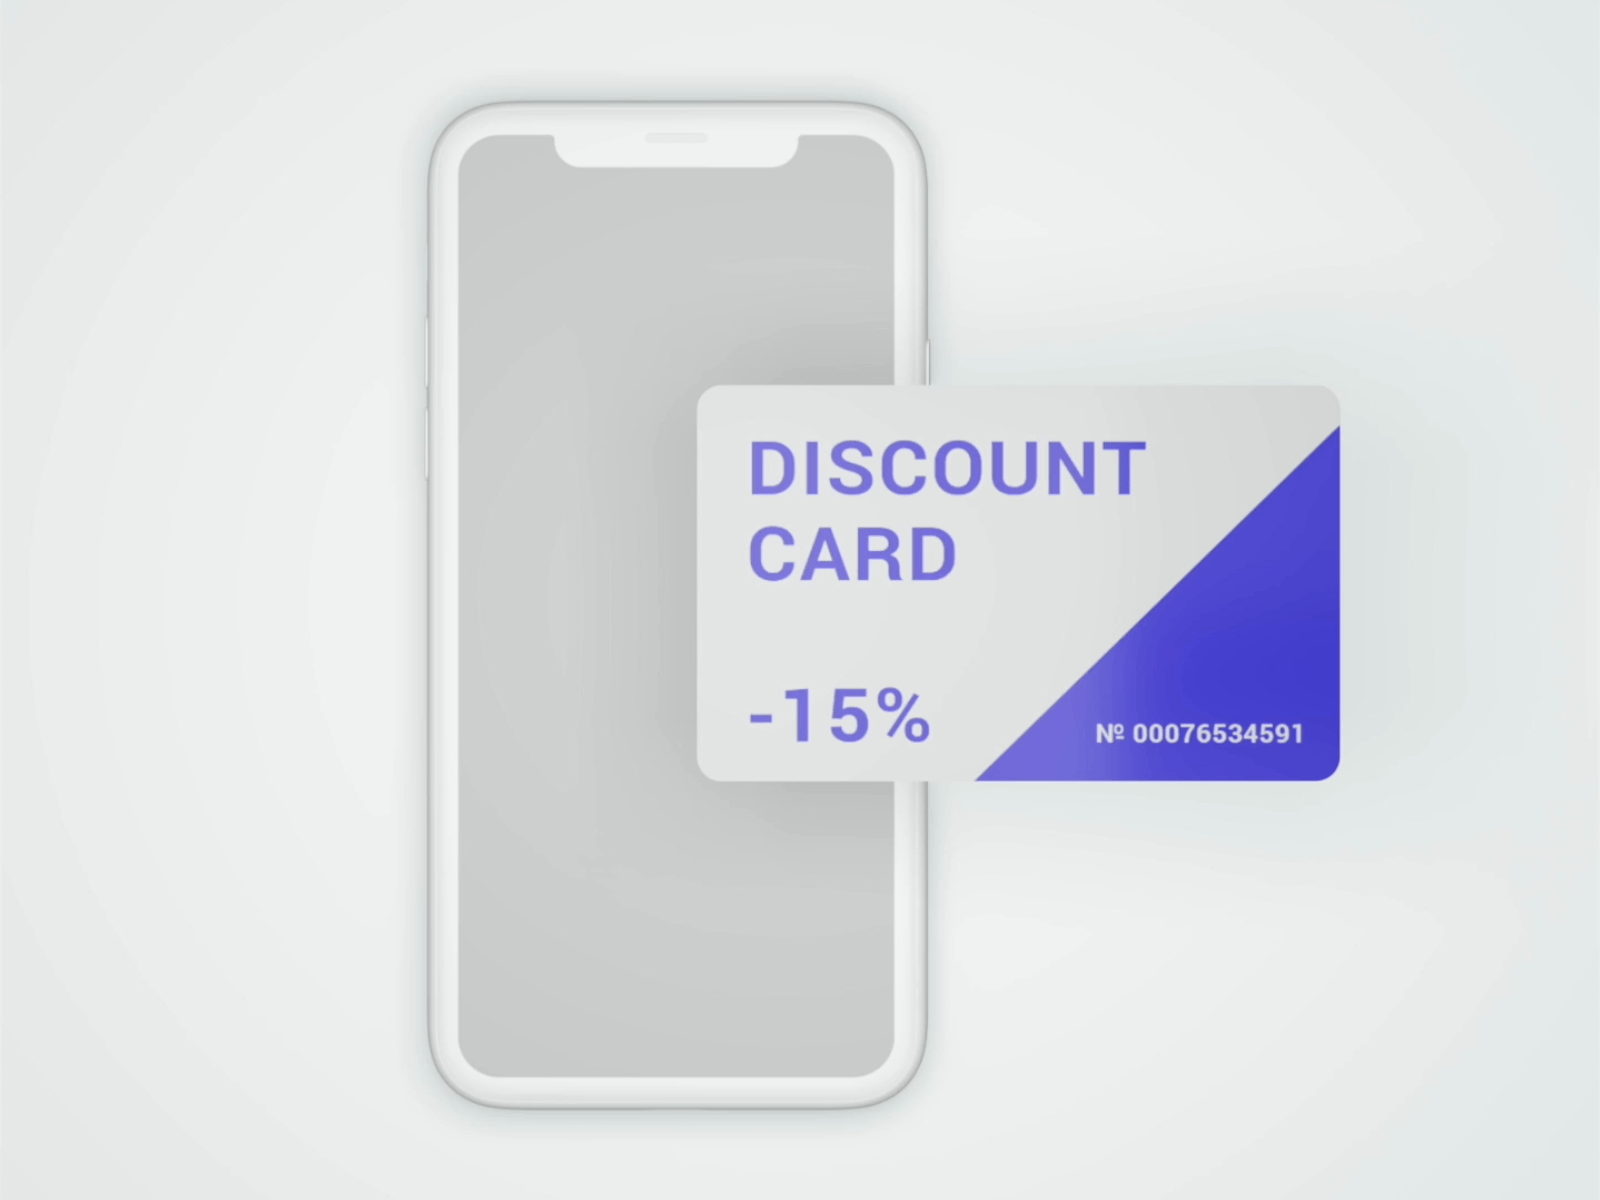 Discount card animated animation app discount mobile